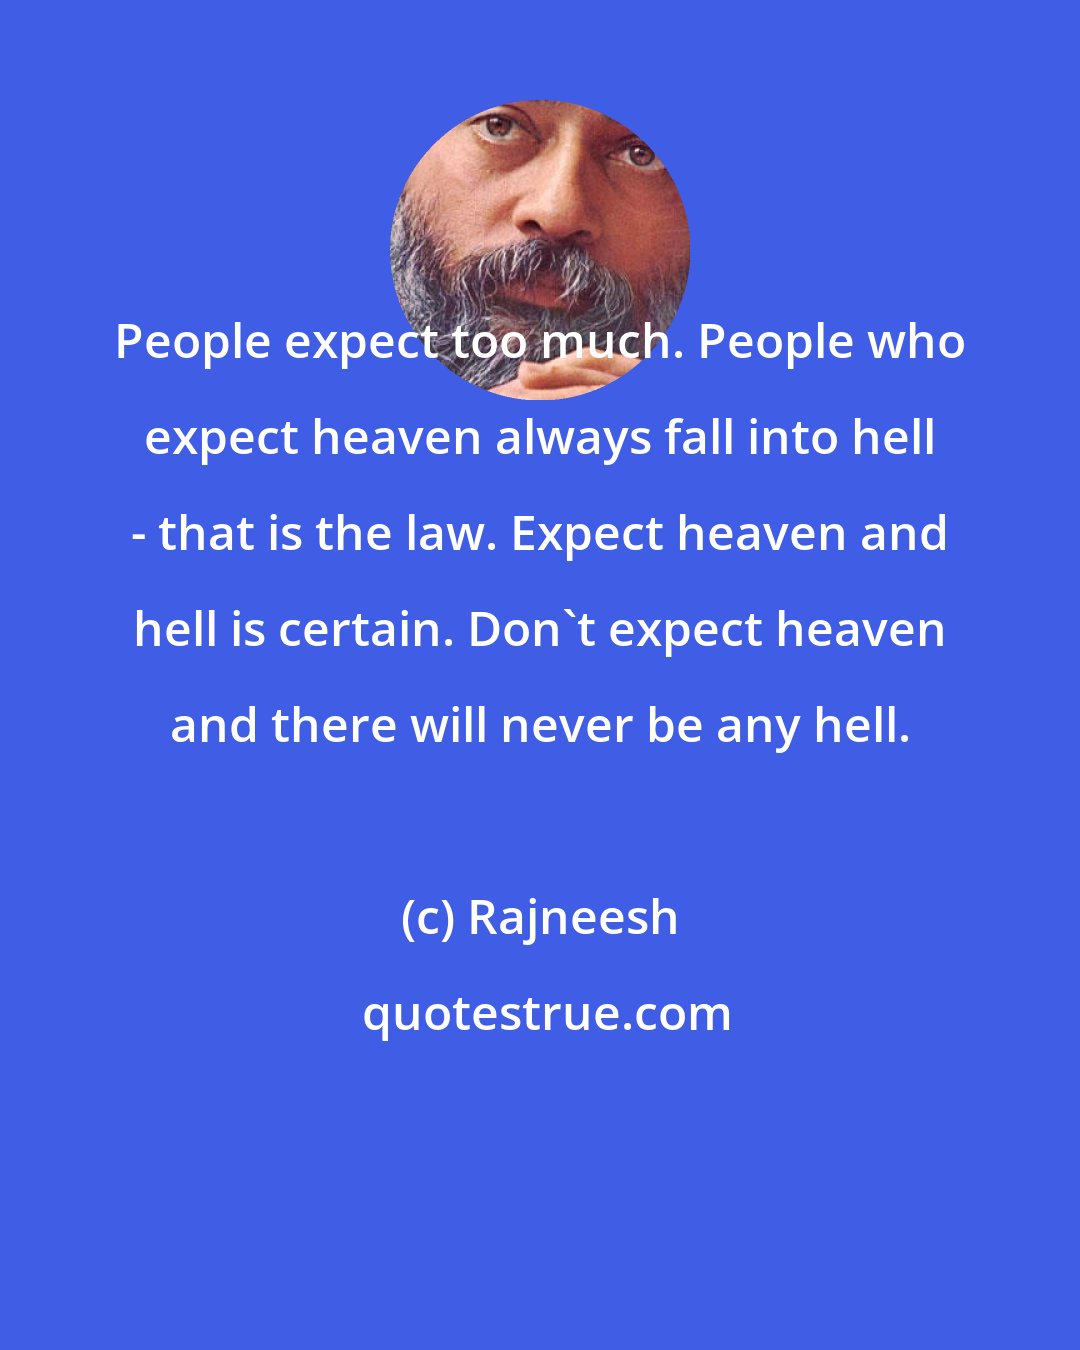 Rajneesh: People expect too much. People who expect heaven always fall into hell - that is the law. Expect heaven and hell is certain. Don't expect heaven and there will never be any hell.